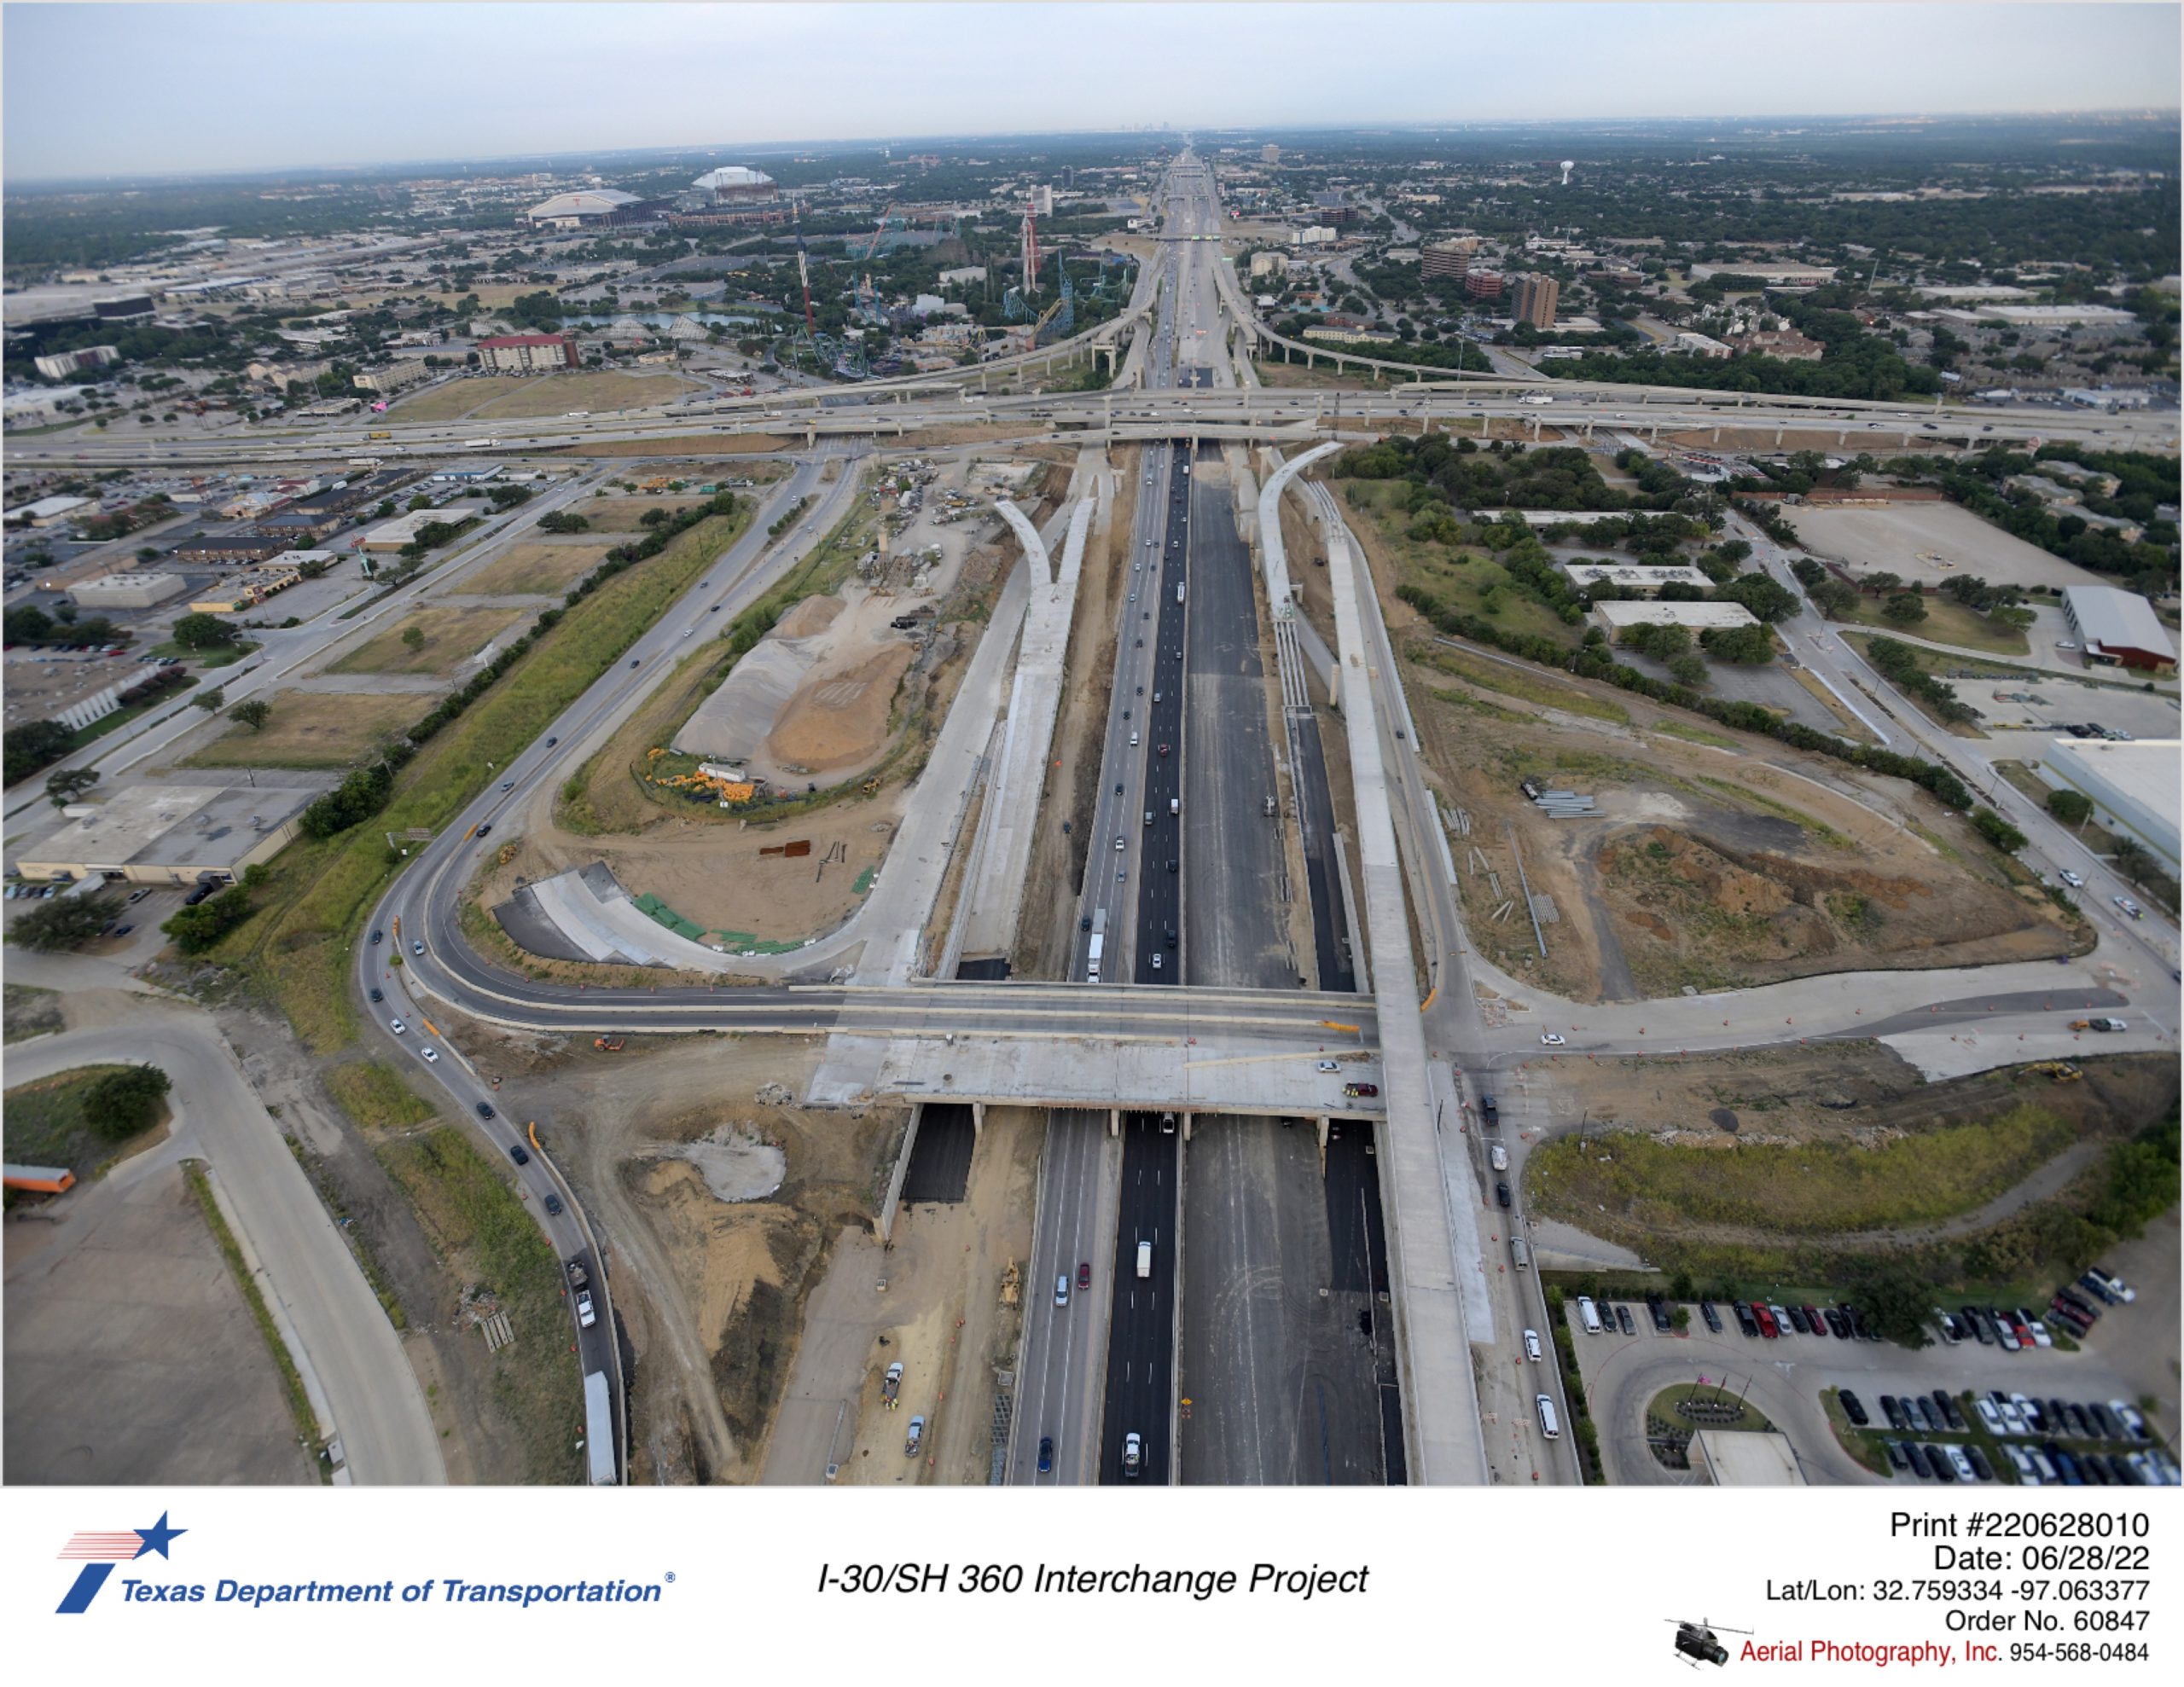 I-30/Six Flags Dr interchange in foreground and I-30/SH 360 interchange in background.